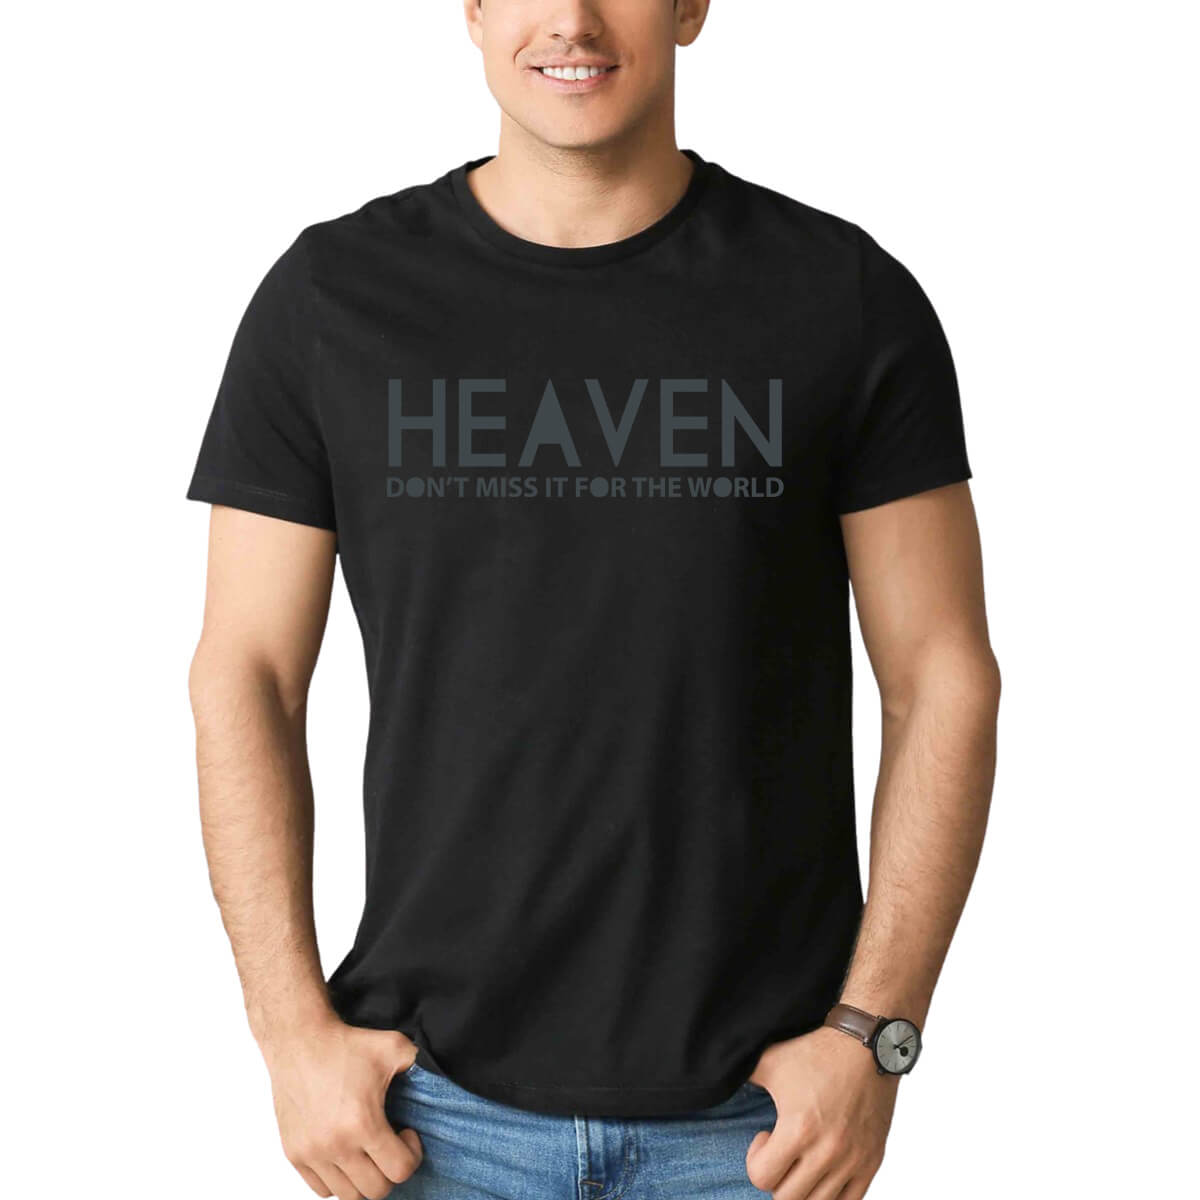 Heaven Don't Miss It For The World Men's T-Shirt